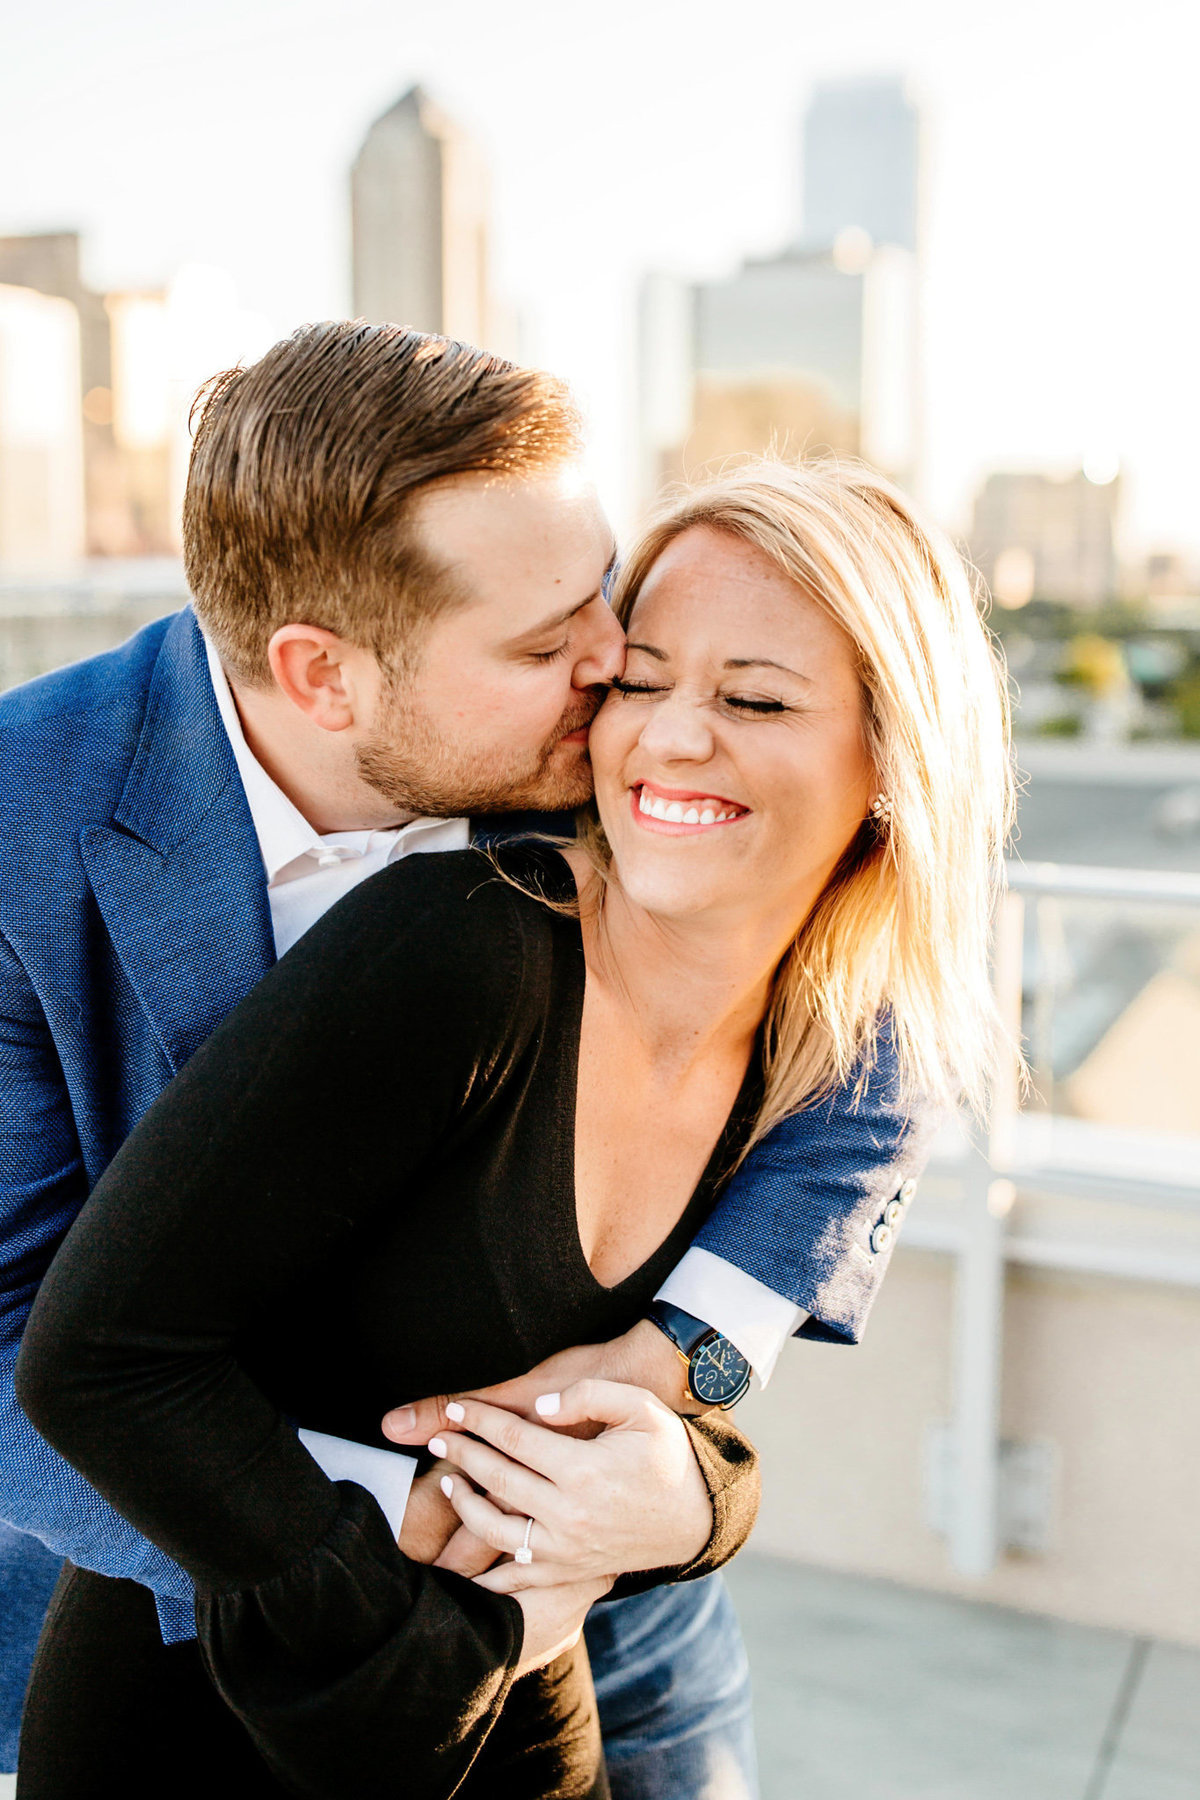 Eric & Megan - Downtown Dallas Rooftop Proposal & Engagement Session-79